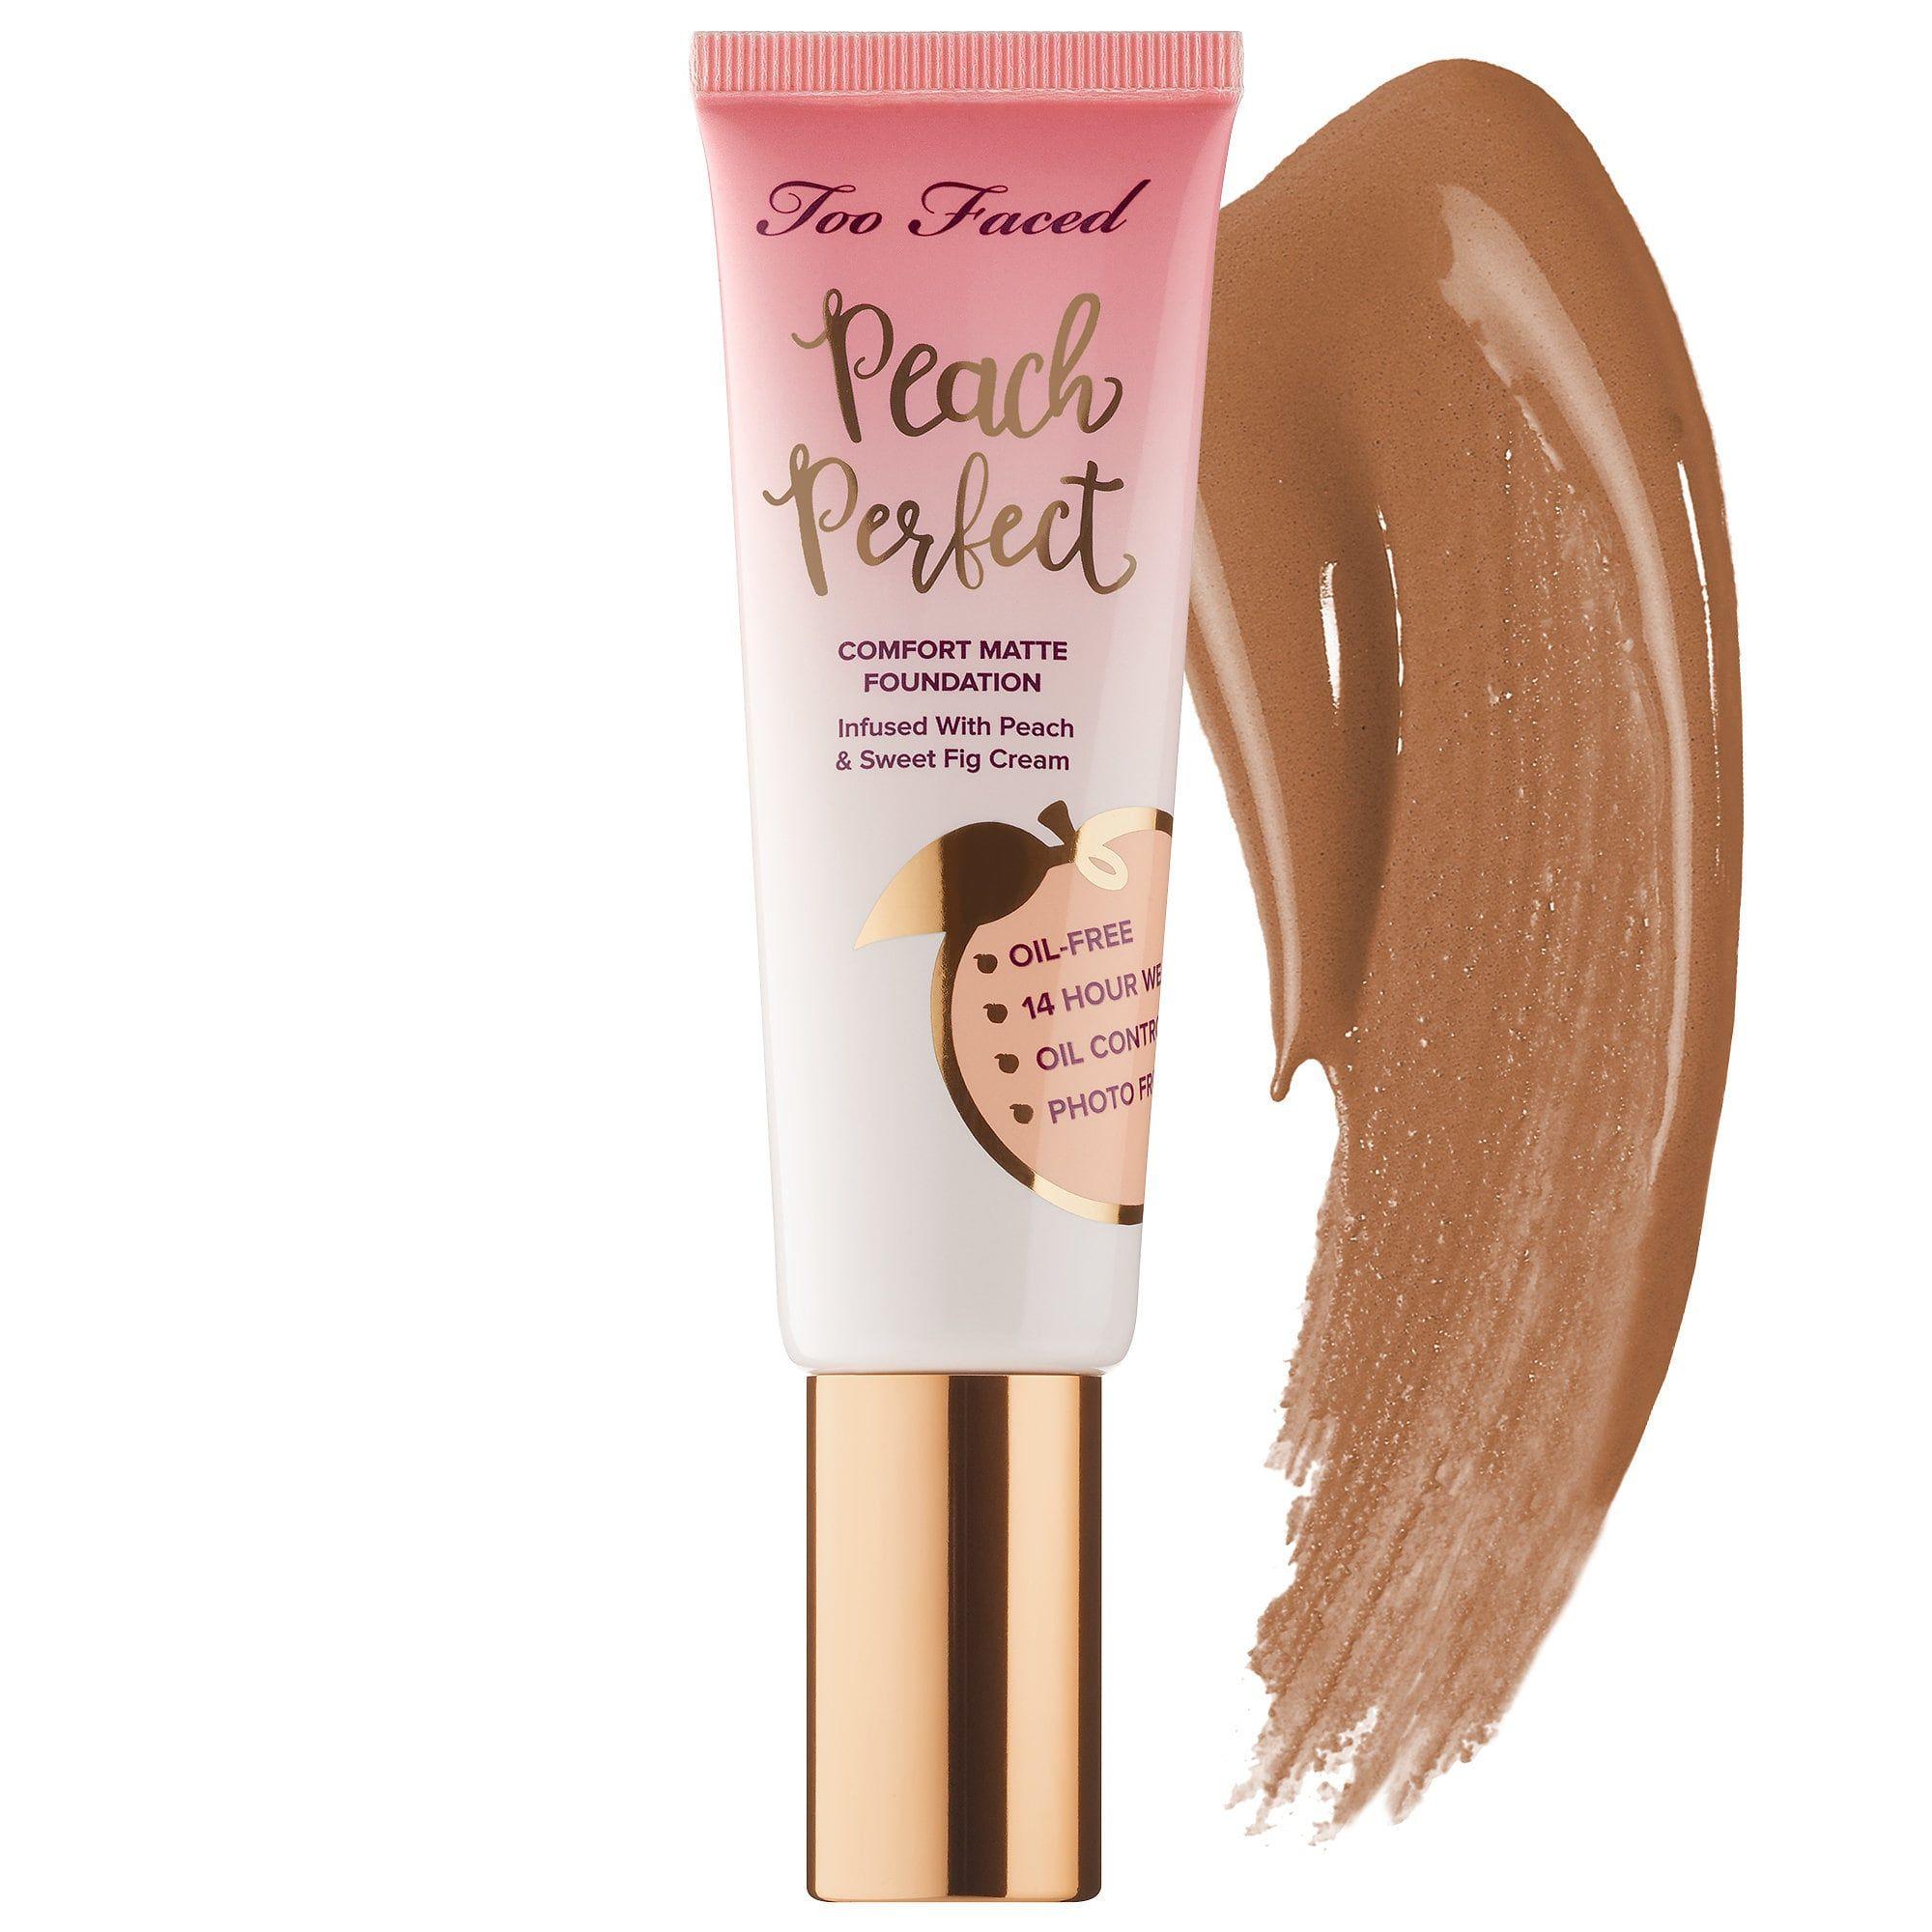 Too Faced Peach Perfect Comfort Matte Foundation Spiced Rum